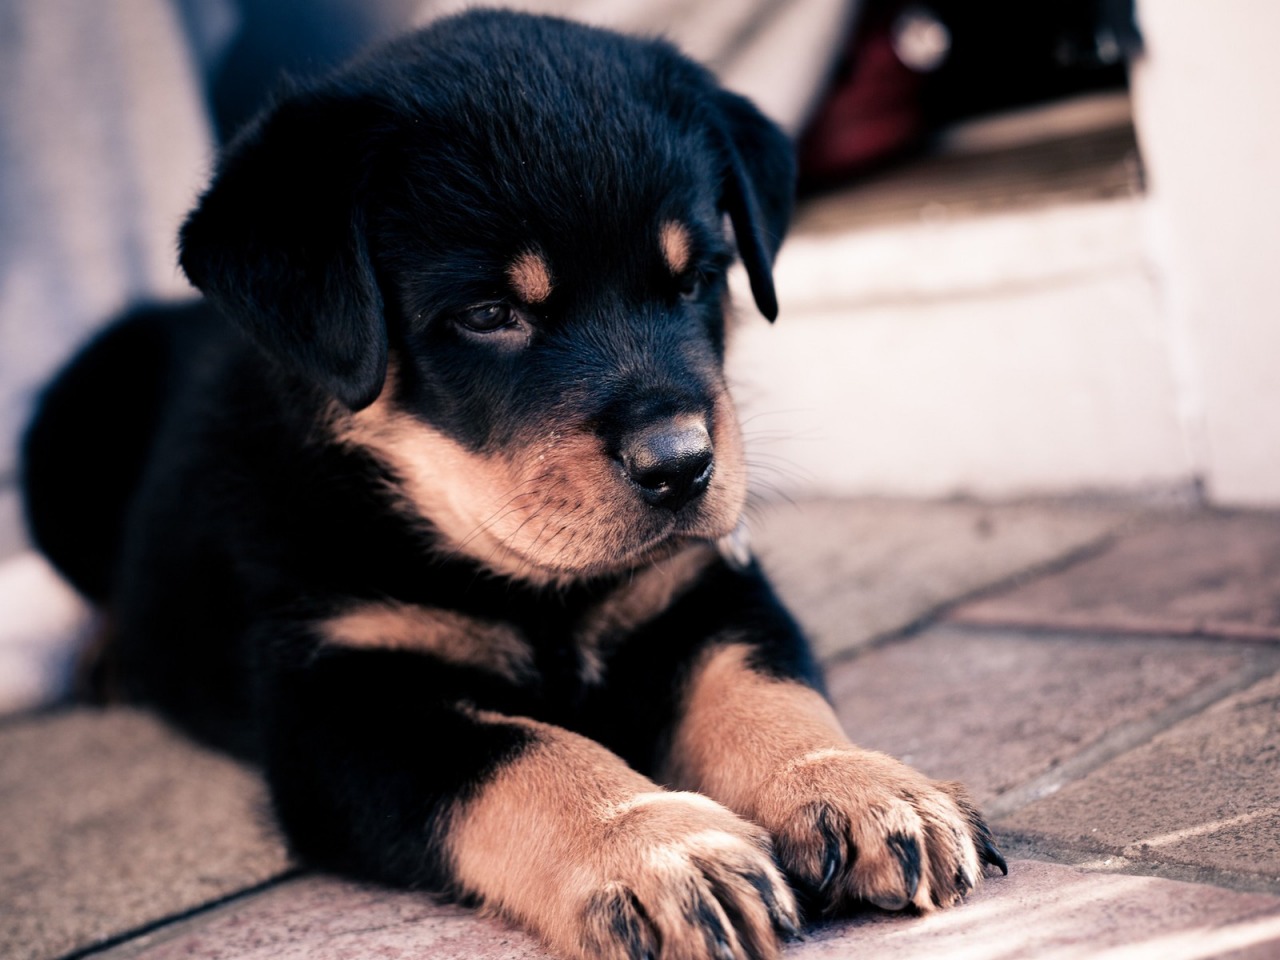 cute puppy pictures